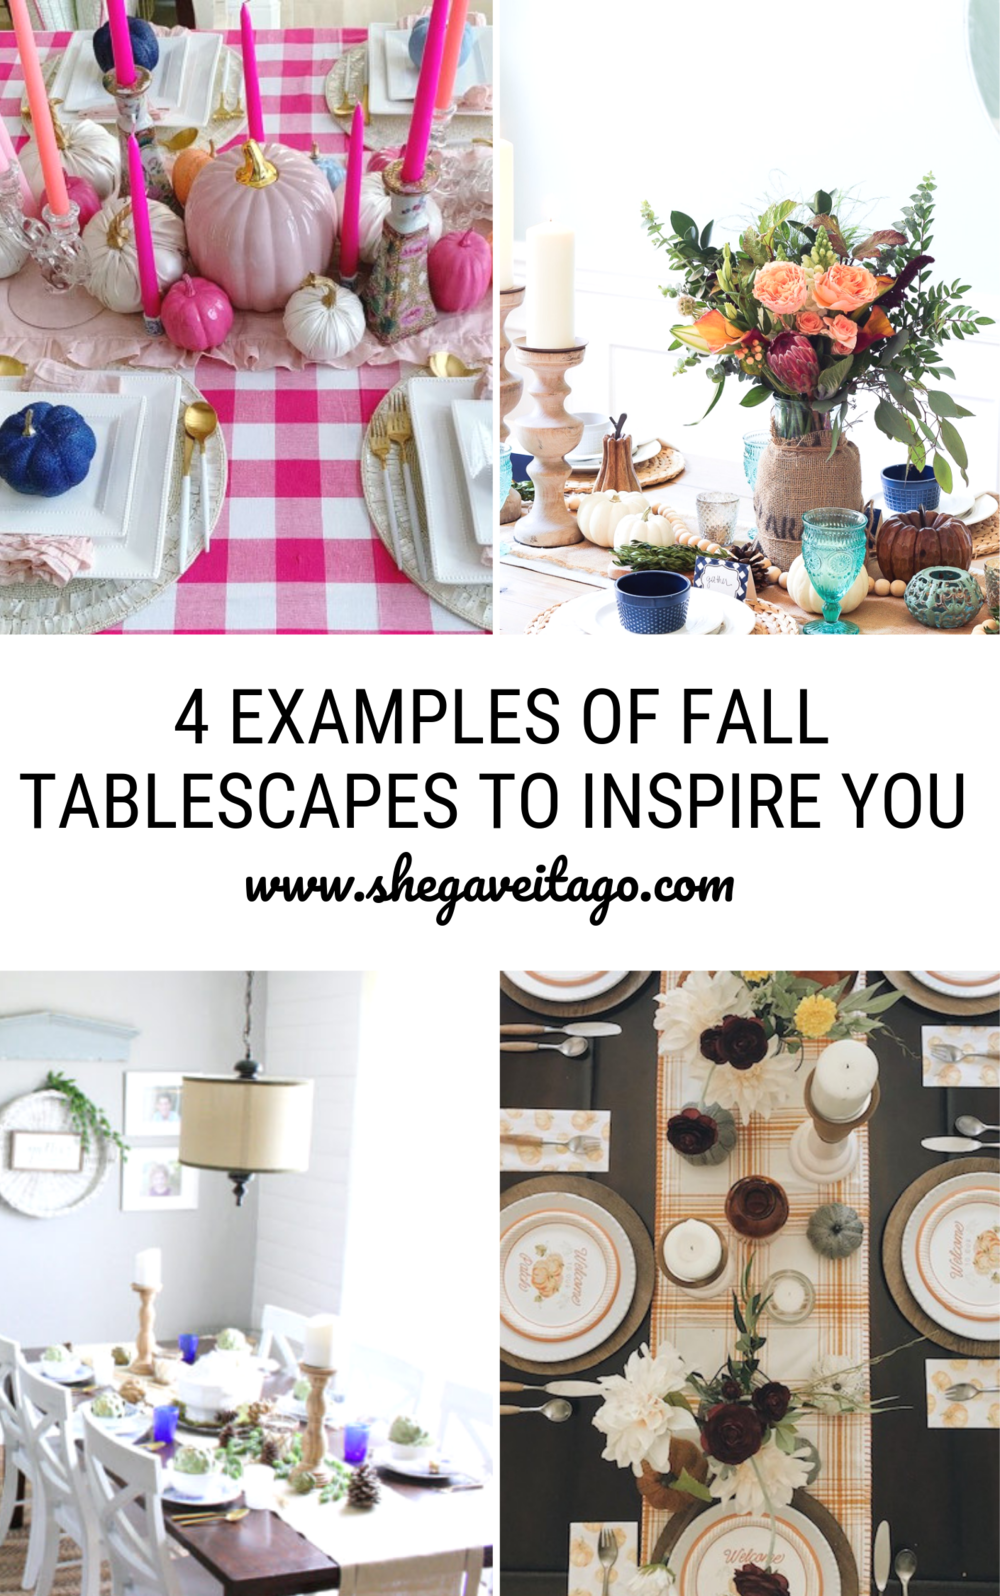 4 Examples Of Fall Tablescapes To Inspire You.png